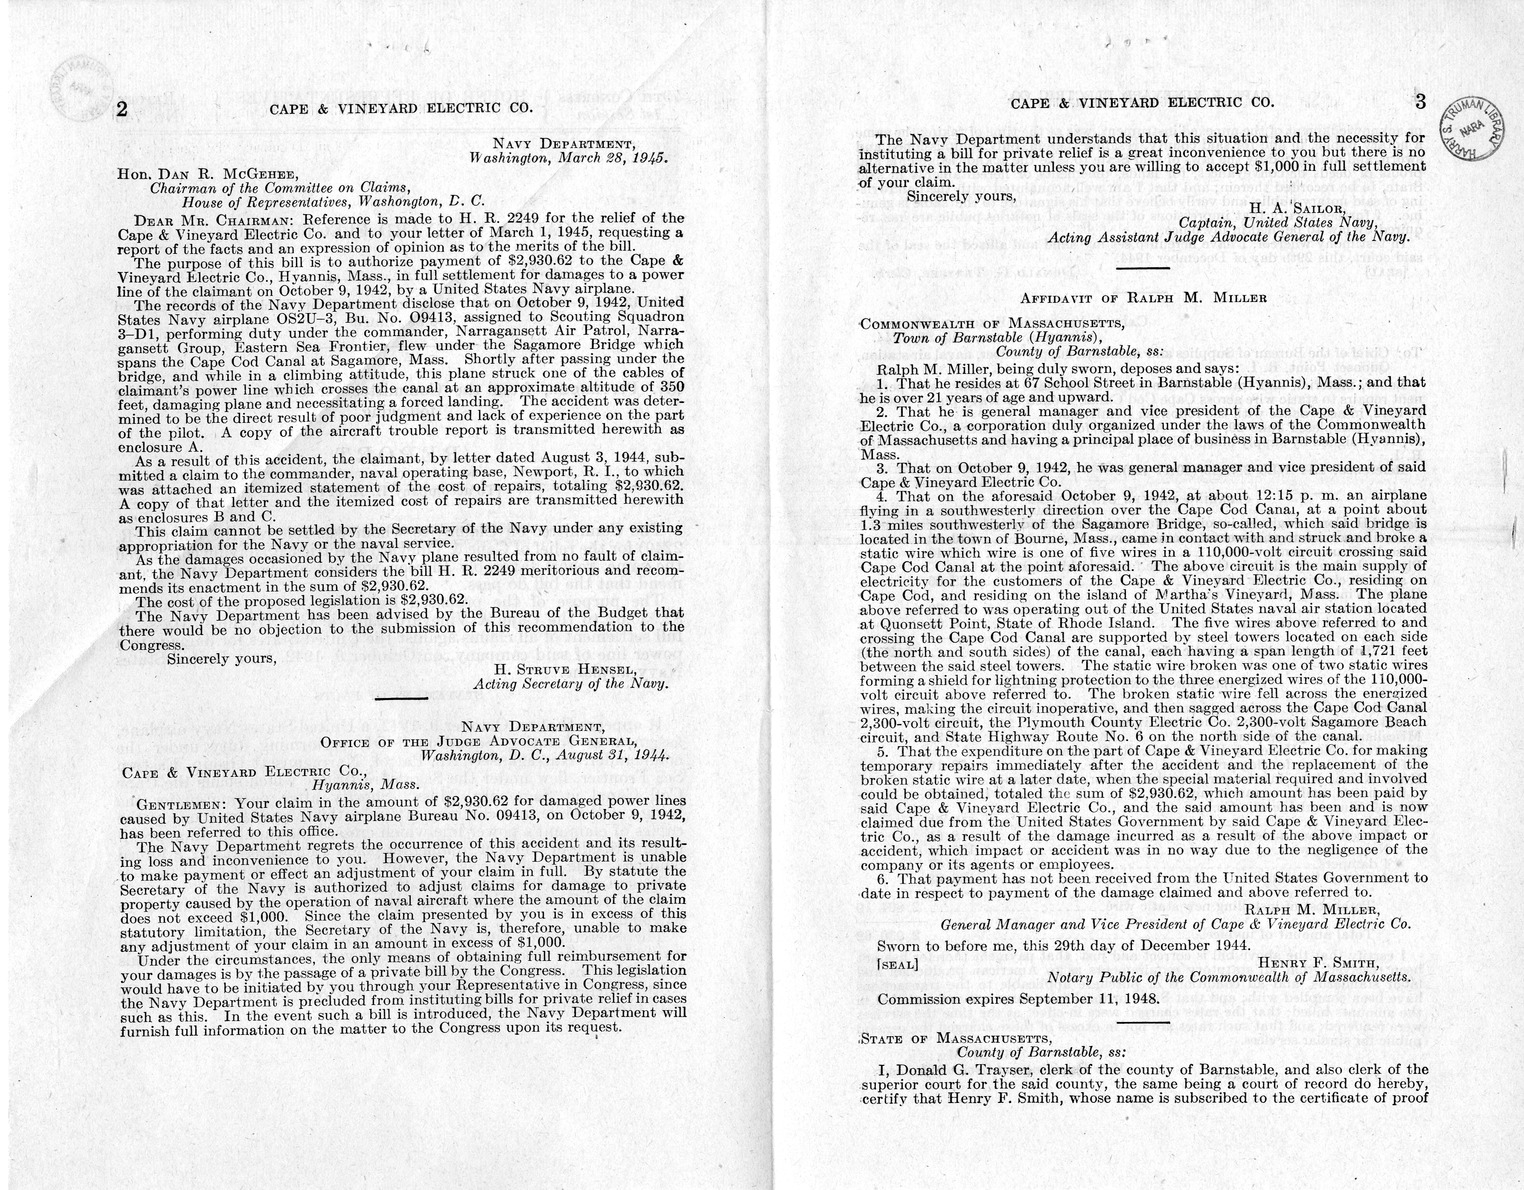 Memorandum from Frederick J. Bailey to M. C. Latta, H. R. 2249, For the Relief of The Cape and Vineyard Electric Company, with Attachments